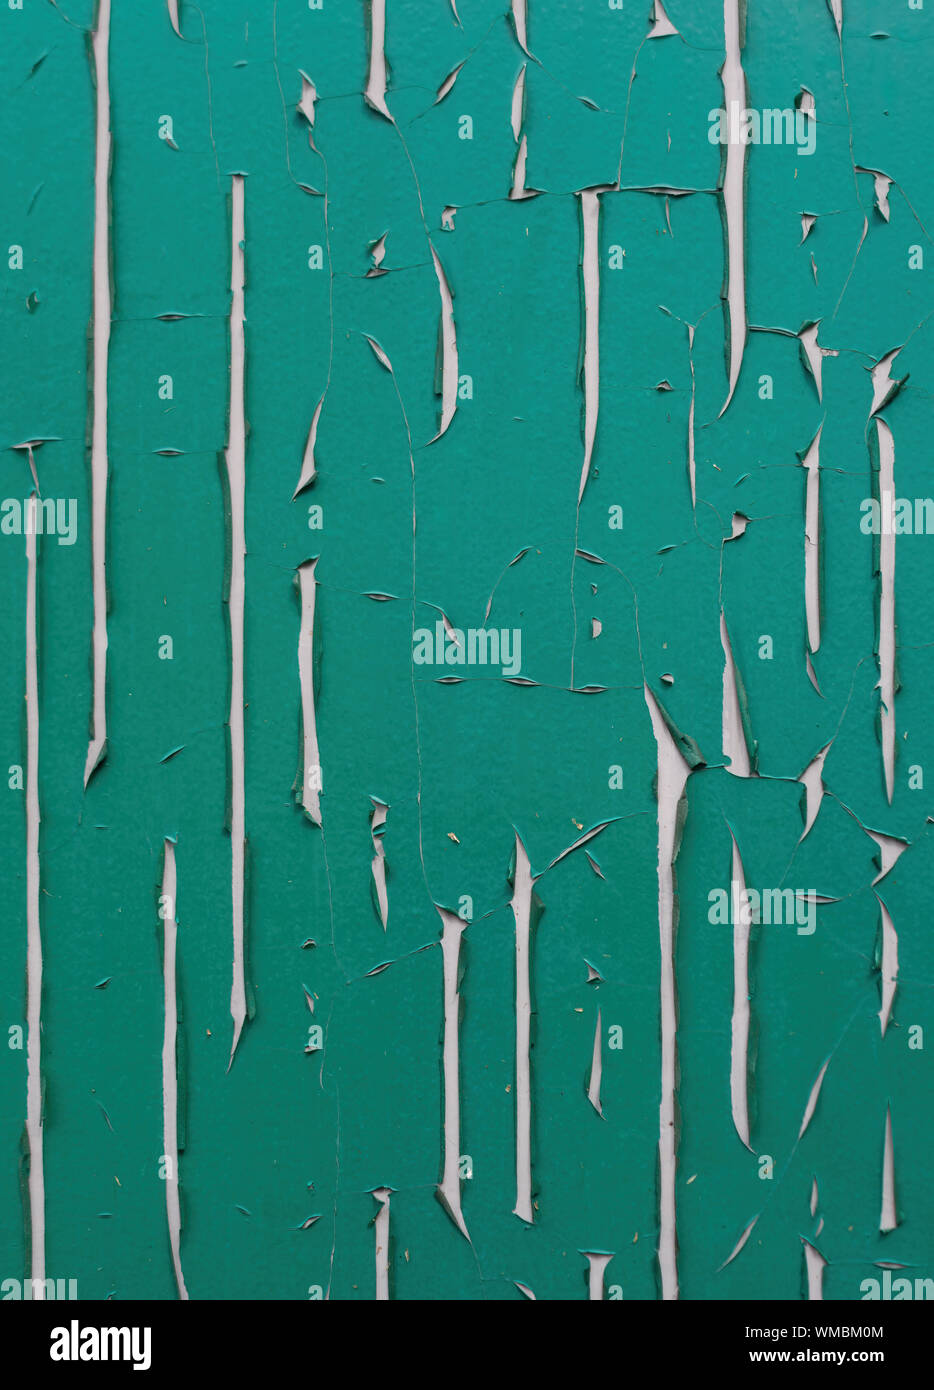 Peeling paint, vertical lines. Background. Vertical composition. Stock Photo